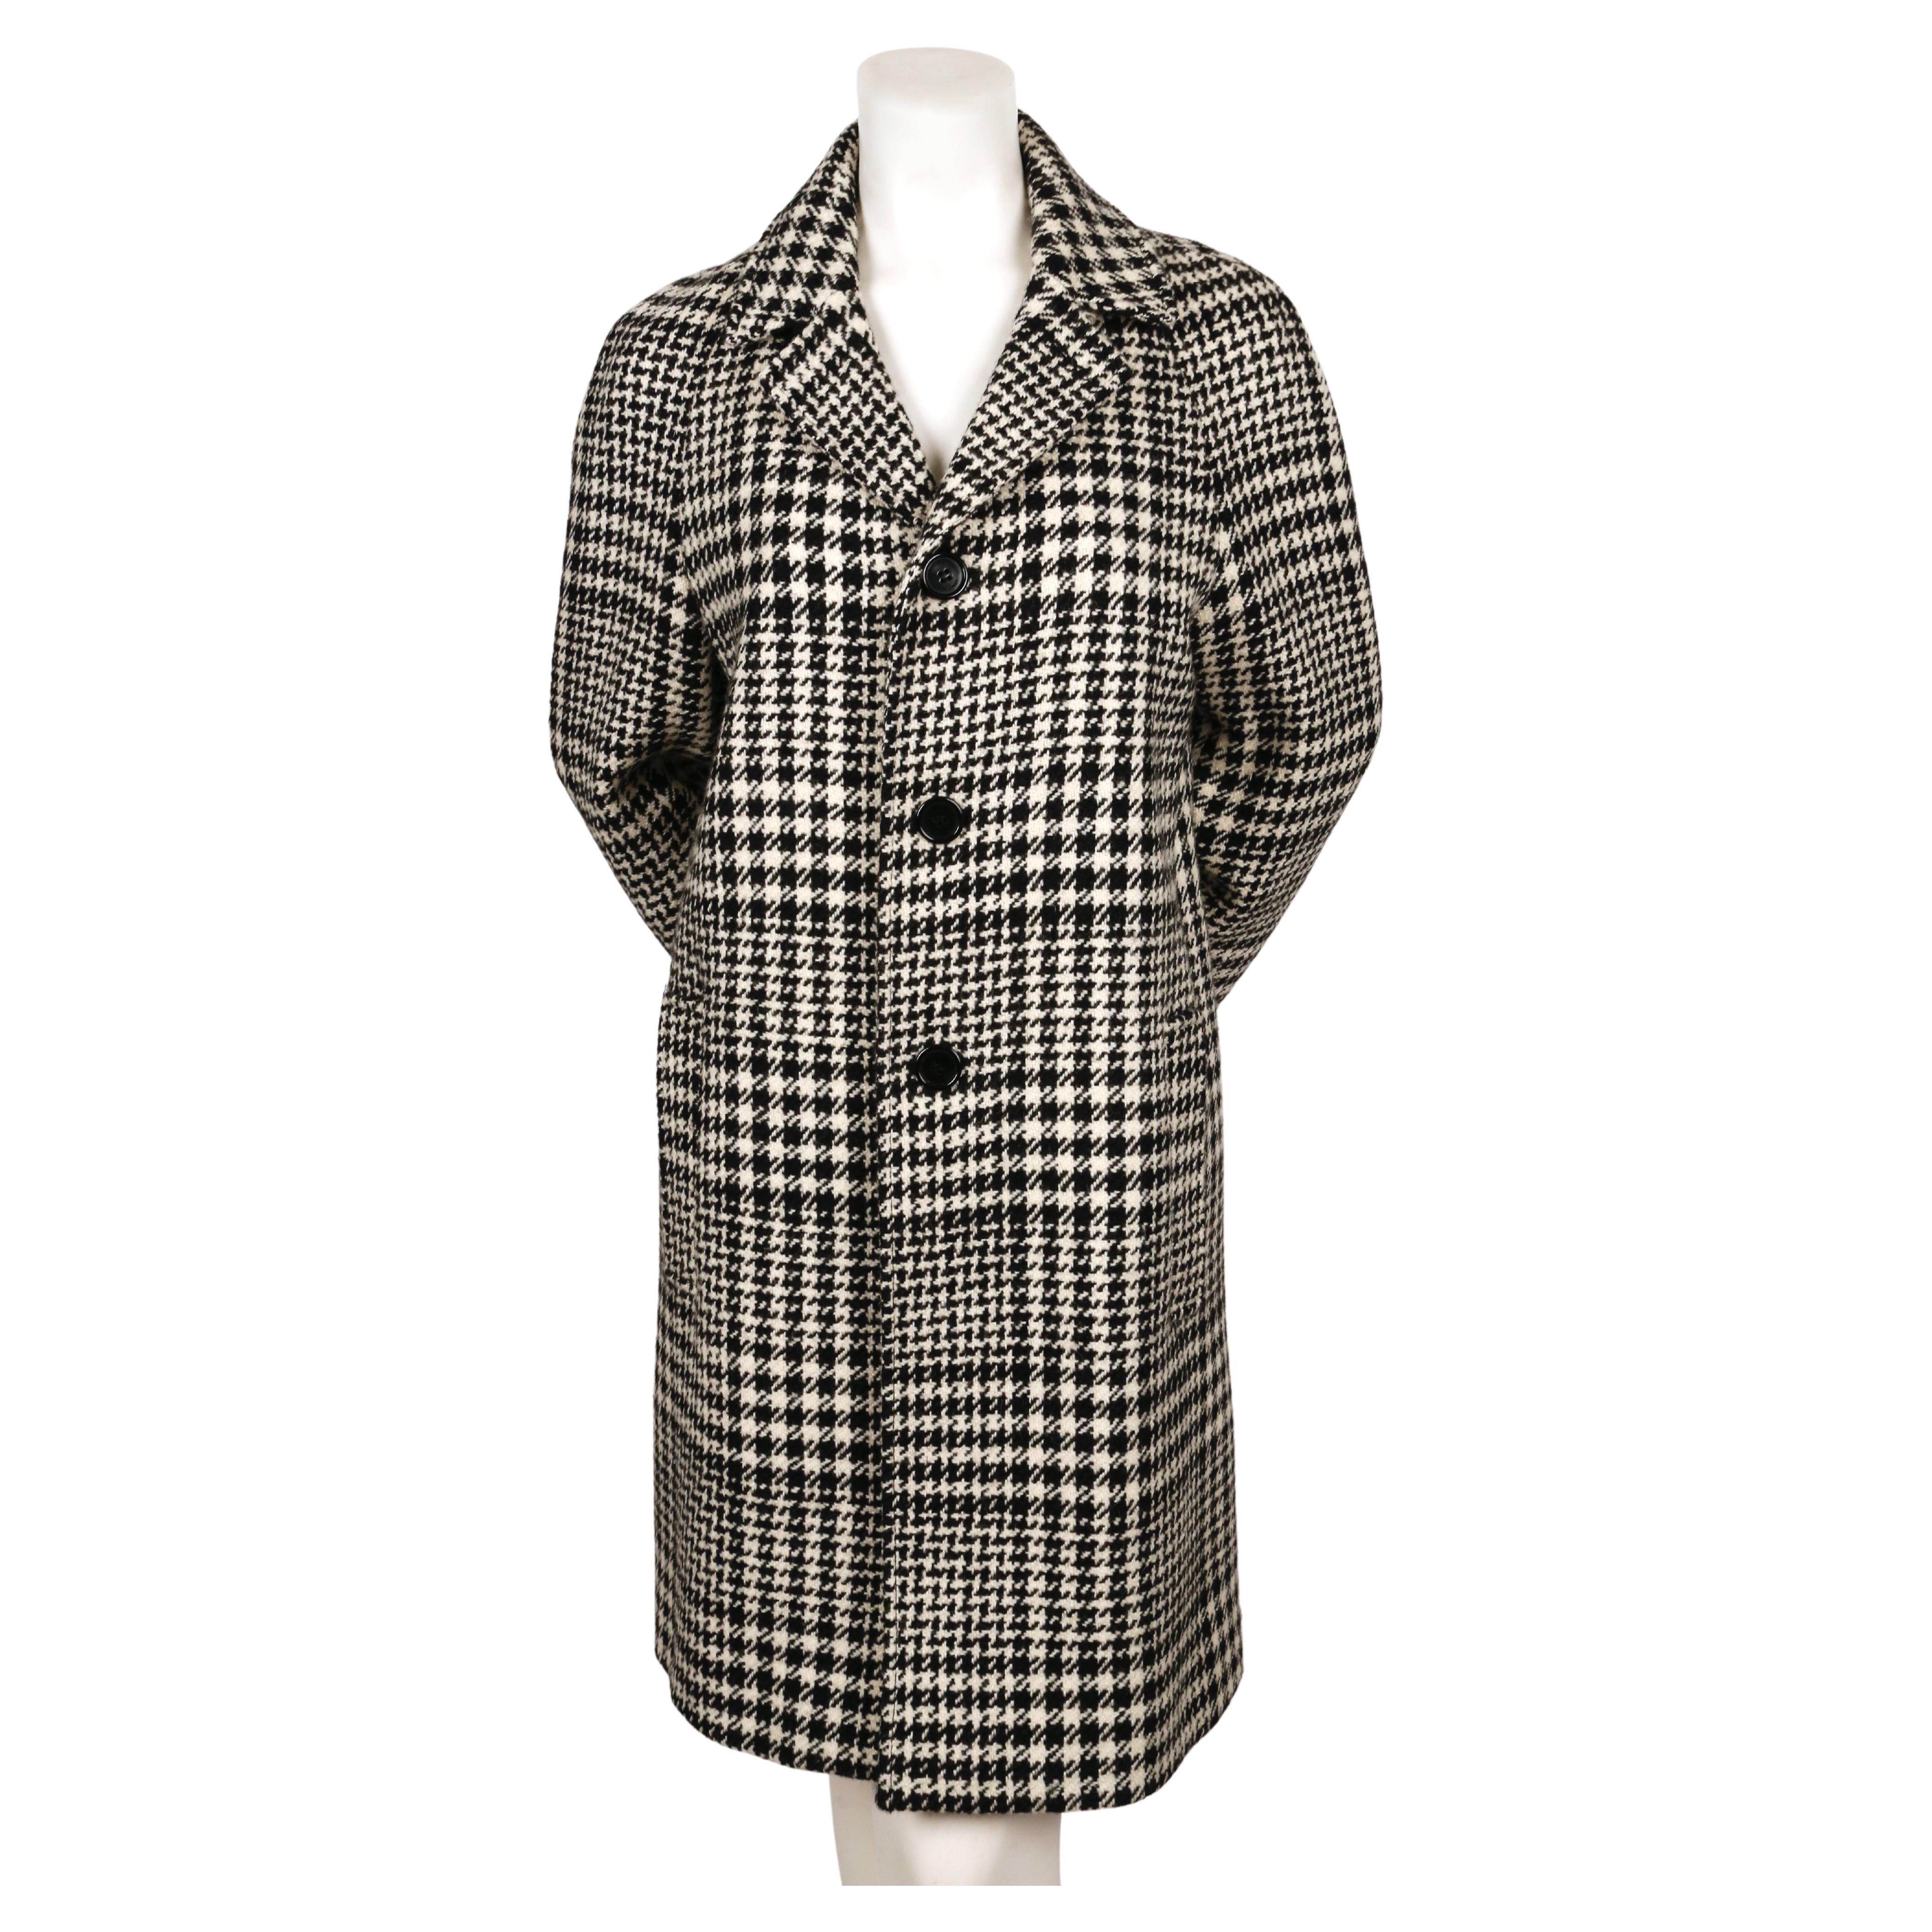 Black and off-white houndstooth woven wool overcoat by Saint Laurent dating to fall of 2014. Same coat seen on the runway . French size 40.  Approximate measurements: 40